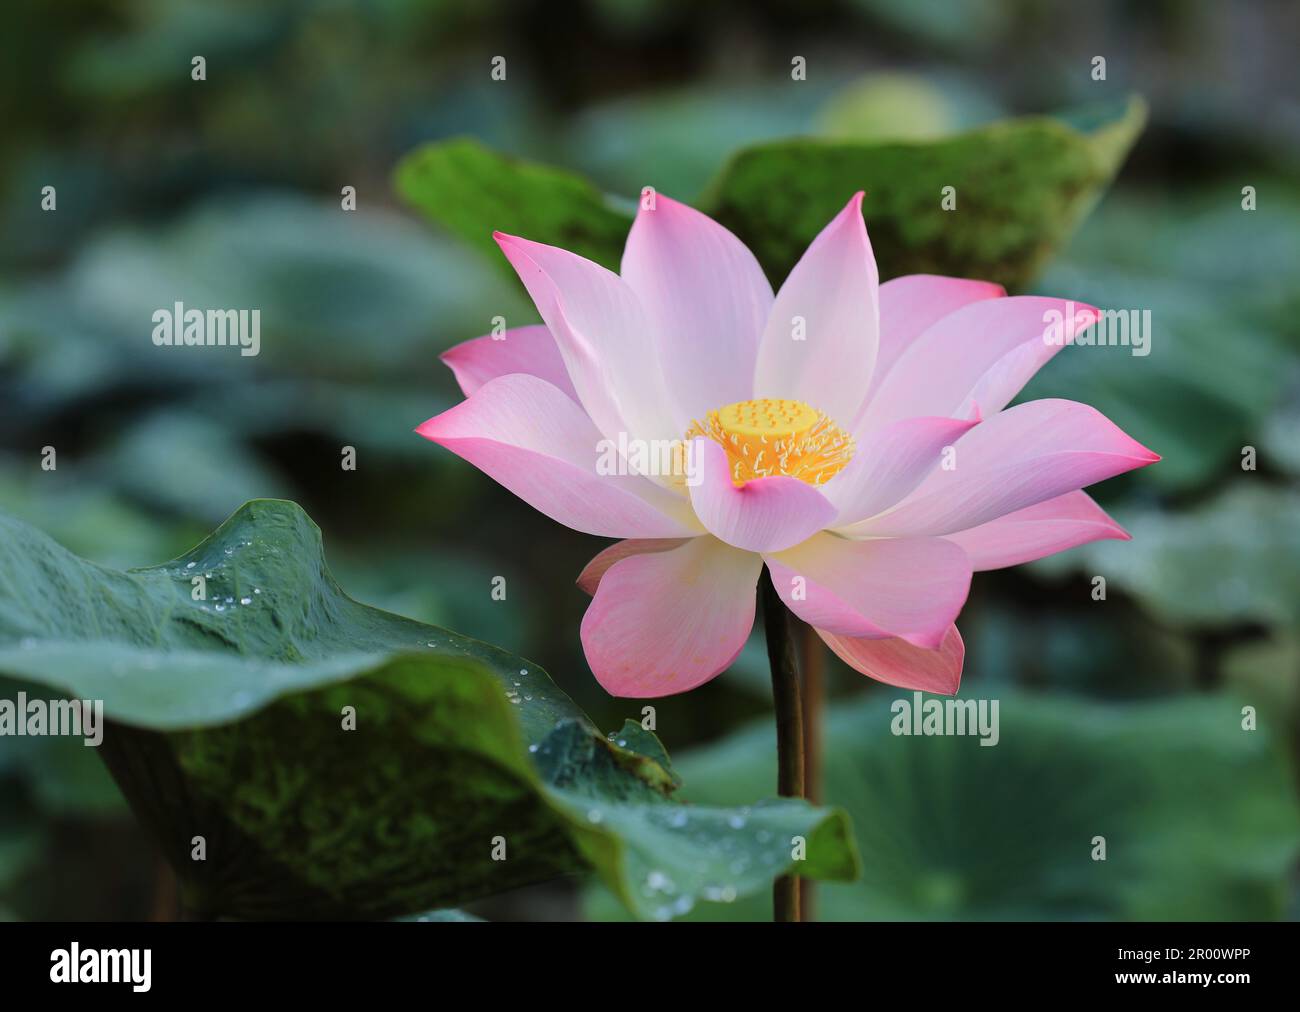 Pink lotus flower with green leaves as background Stock Photo